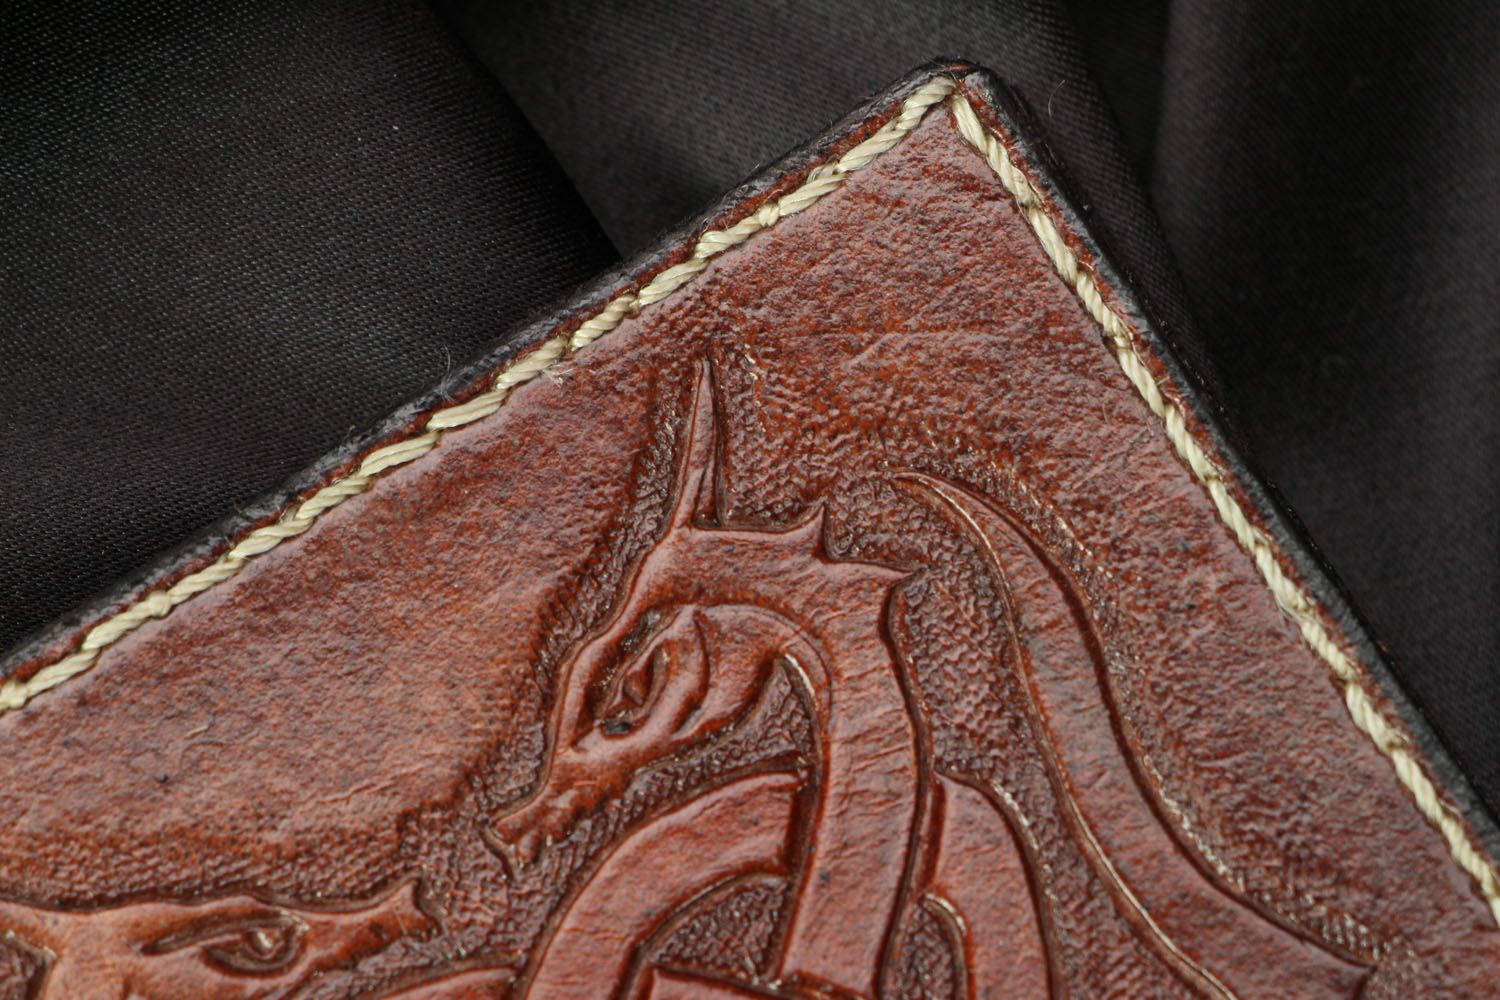 Leather passport cover photo 3